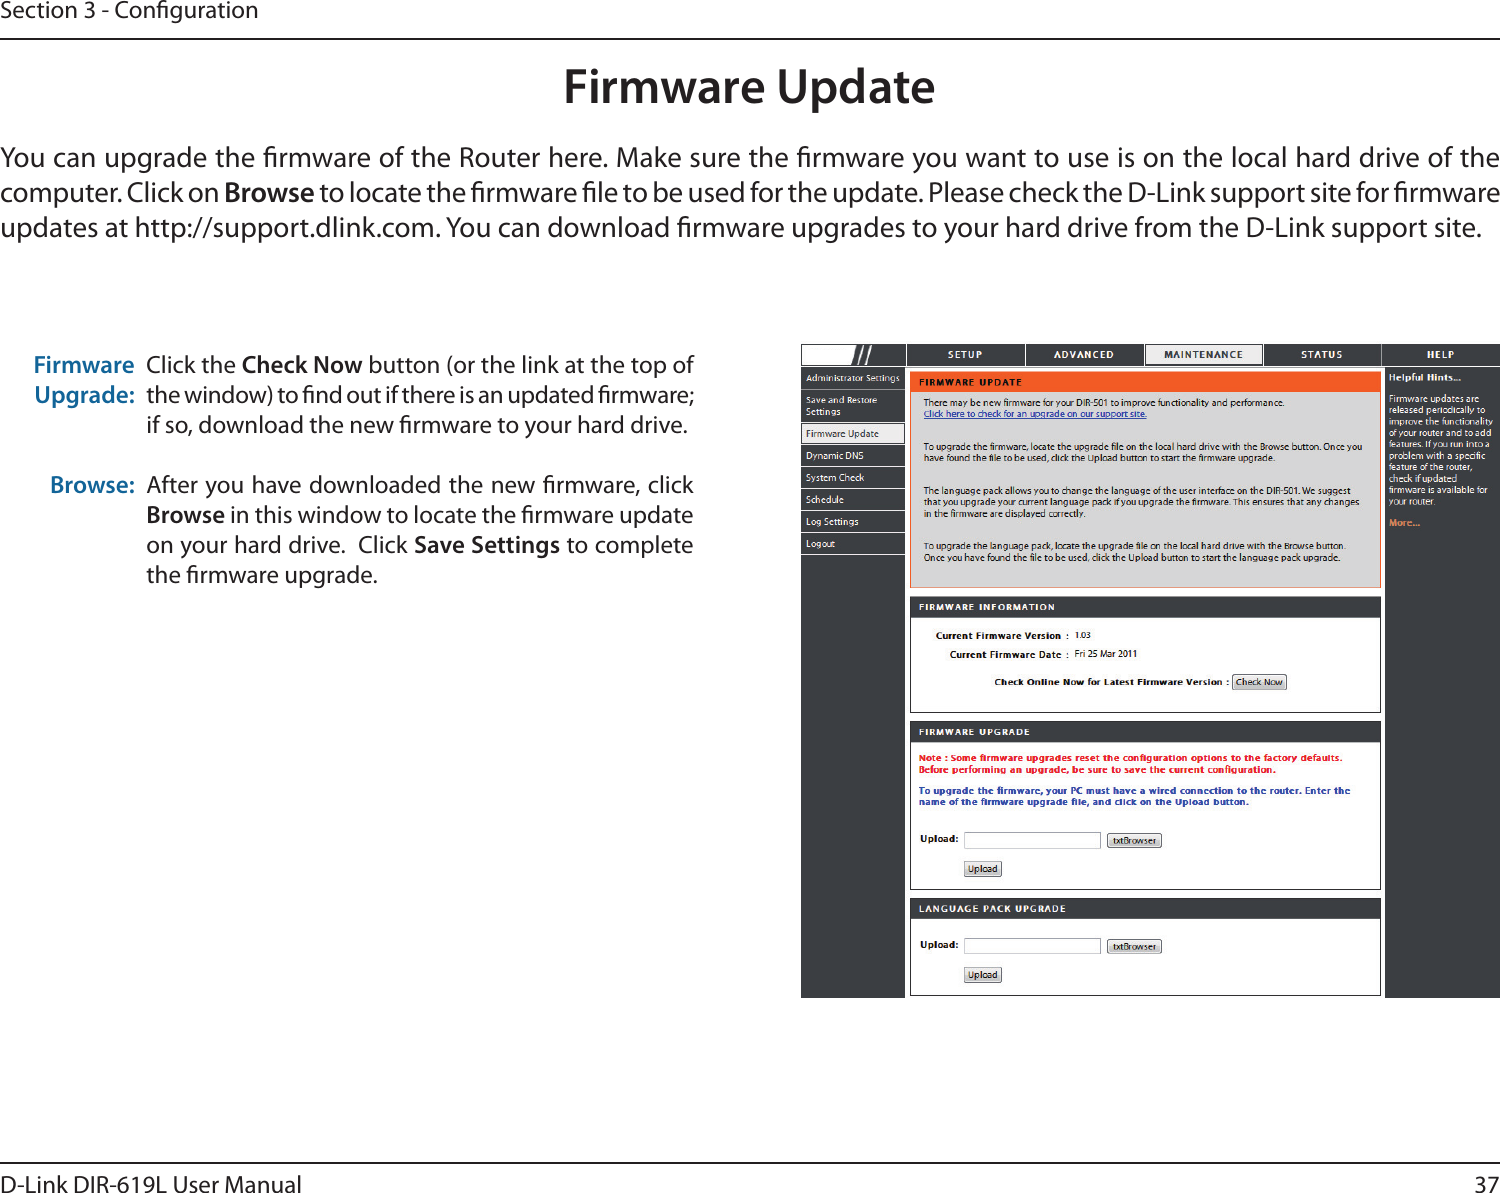 37D-Link DIR-619L User ManualSection 3 - CongurationFirmware UpdateClick the Check Now button (or the link at the top of the window) to nd out if there is an updated rmware; if so, download the new rmware to your hard drive.After you have downloaded the new rmware, click Browse in this window to locate the rmware update on your hard drive.  Click Save Settings to complete the rmware upgrade.Firmware Upgrade:Browse:You can upgrade the rmware of the Router here. Make sure the rmware you want to use is on the local hard drive of the computer. Click on Browse to locate the rmware le to be used for the update. Please check the D-Link support site for rmware updates at http://support.dlink.com. You can download rmware upgrades to your hard drive from the D-Link support site.DIR-619L